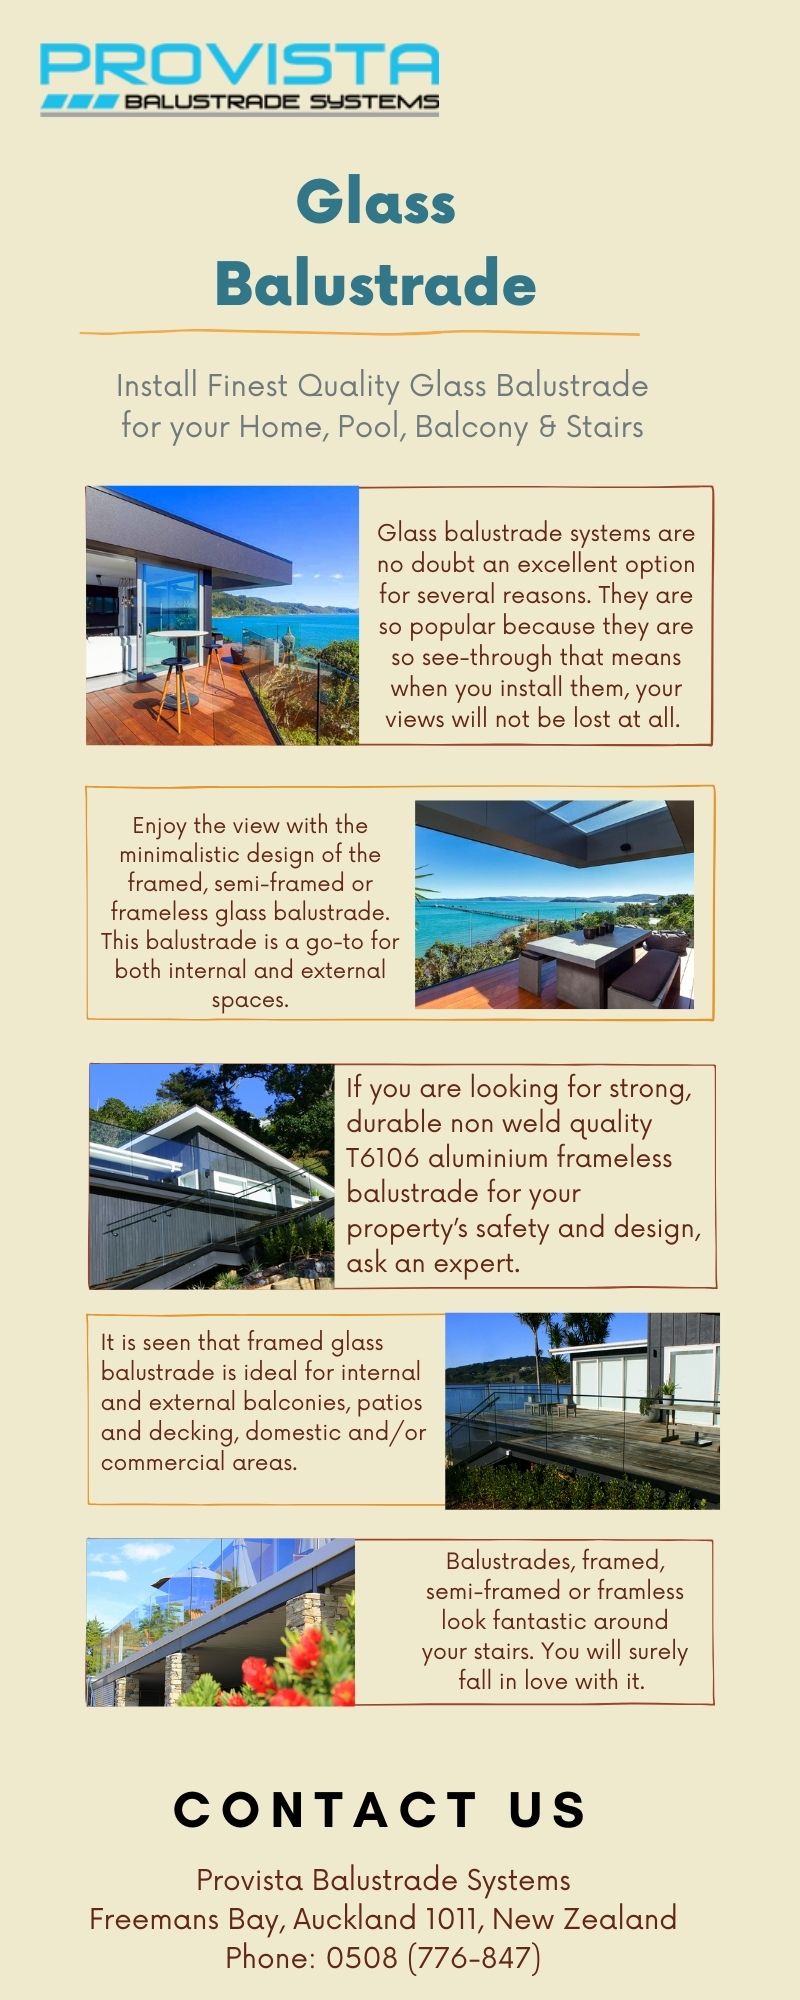 Install Finest Quality Glass Balustrade for your Home, Pool, Balcony & Stairs Glass balustrade systems are no doubt an excellent option for several reasons. They are so popular because they are so see-through that means when you install them, your views will not be lost at all. For more details, visit: https://provista.co.nz
 by Provista